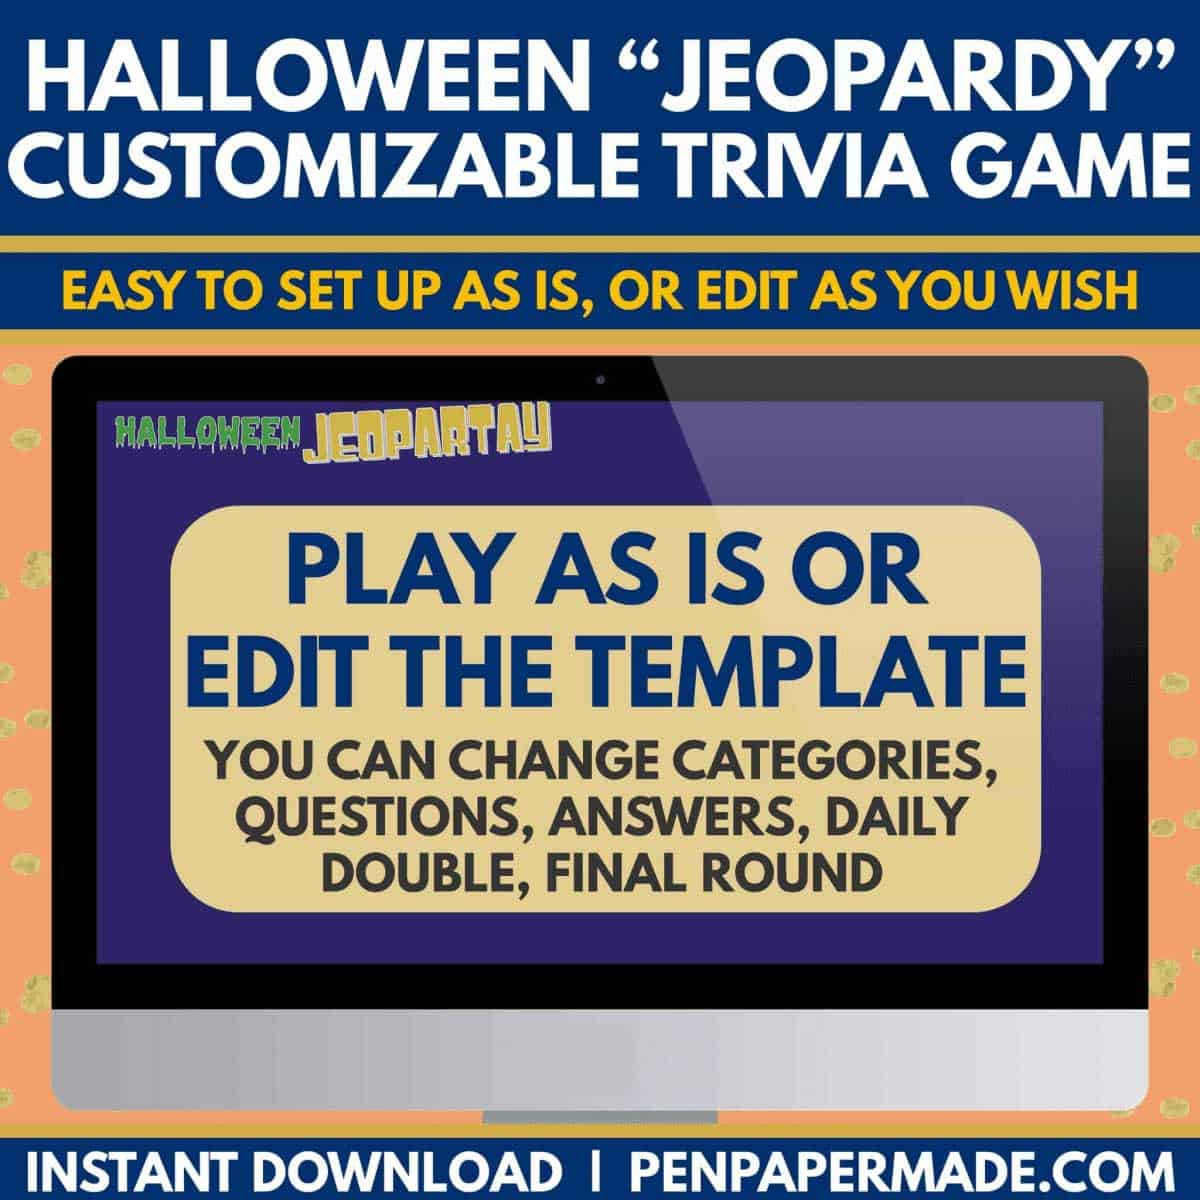 pre-loaded halloween jeopardy questions to play as is or edit template with own questions.